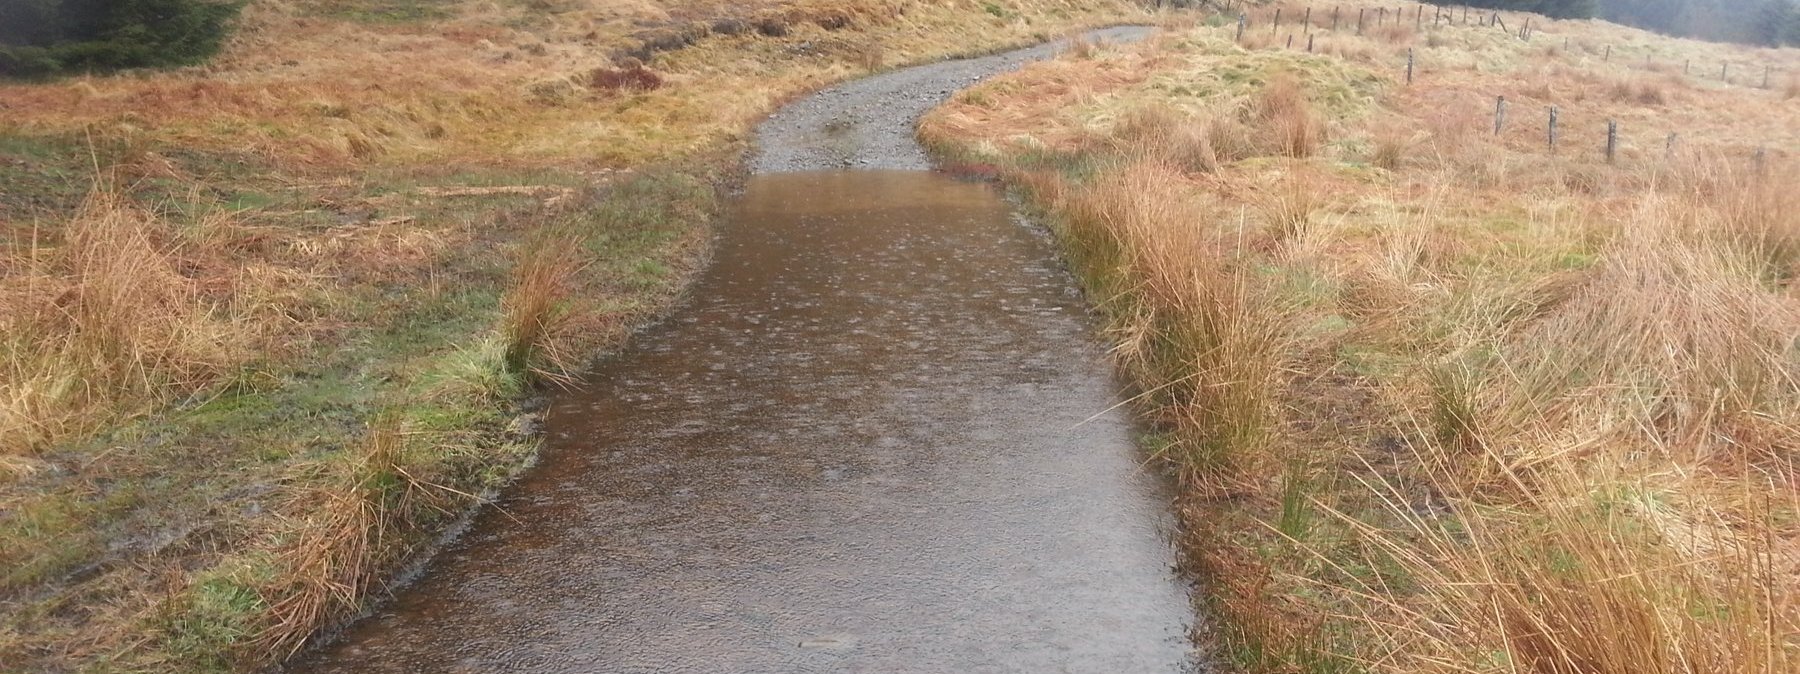 Water-logged road as I rejoin the tarmac